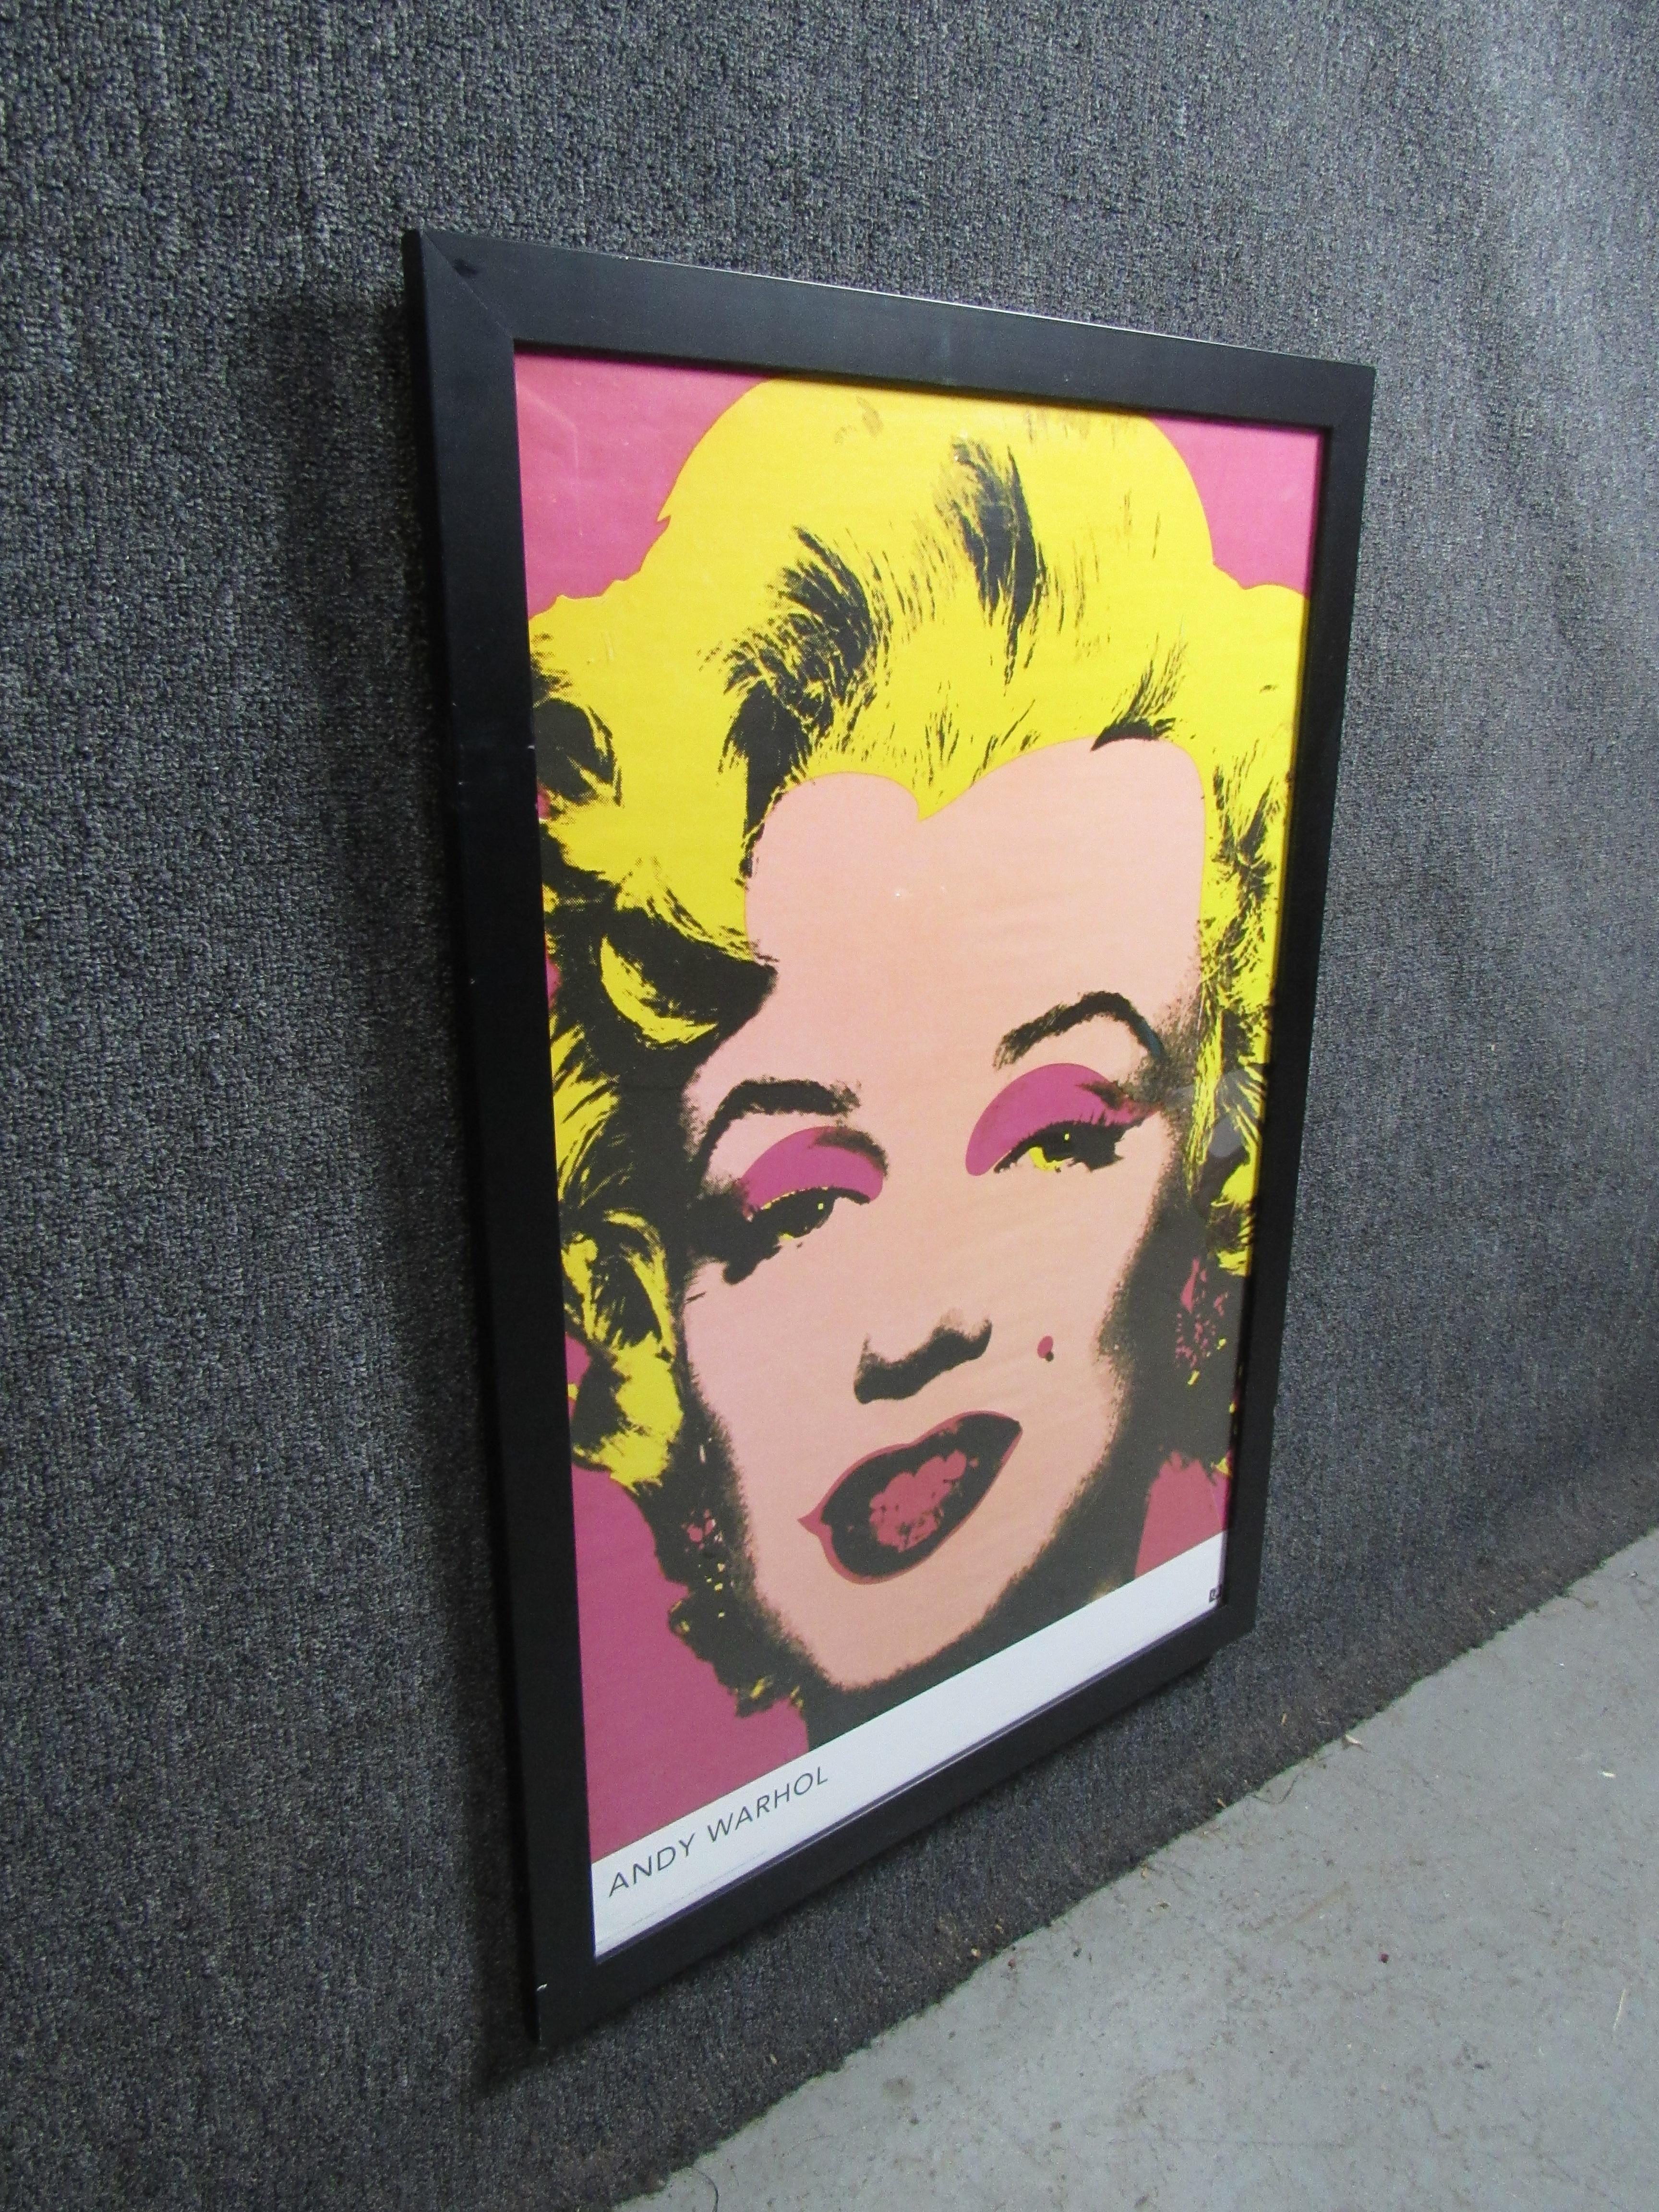 Bring home timeless American pop art with this vintage framed poster. Featuring Andy Warhol’s iconic Marilyn Monroe screen print, the vibrant pinks and yellow are sure to add a classic touch to any room. Please confirm item pickup location (Brooklyn